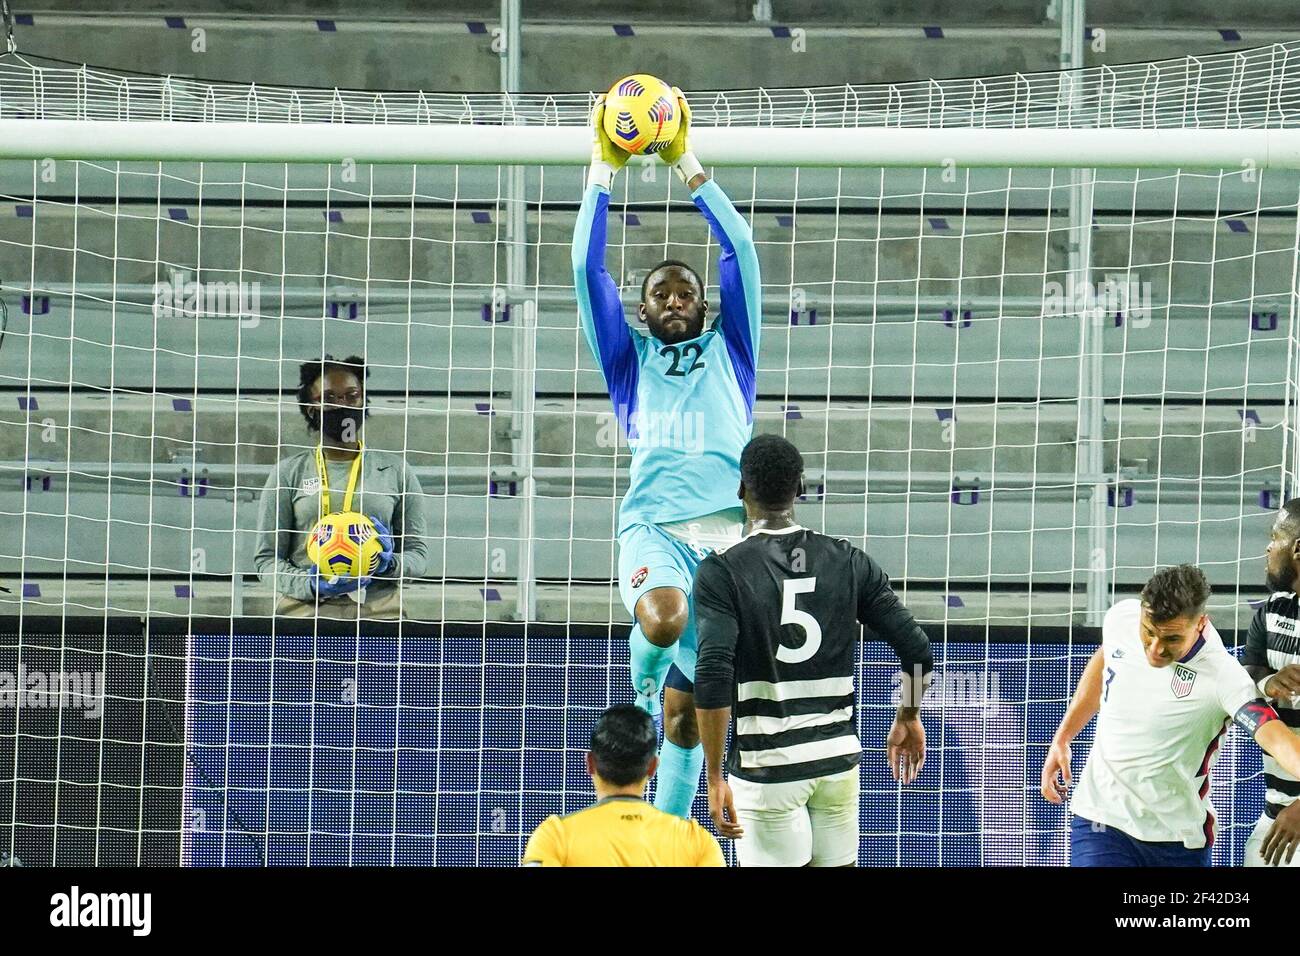 Orlando, Florida, USA, January 31, 2021, Trinidad and Tobago Goalkeeper Adrian Foncette #22 makes a save an International Friendly Match against USA.  (Photo Credit:  Marty Jean-Louis) Stock Photo